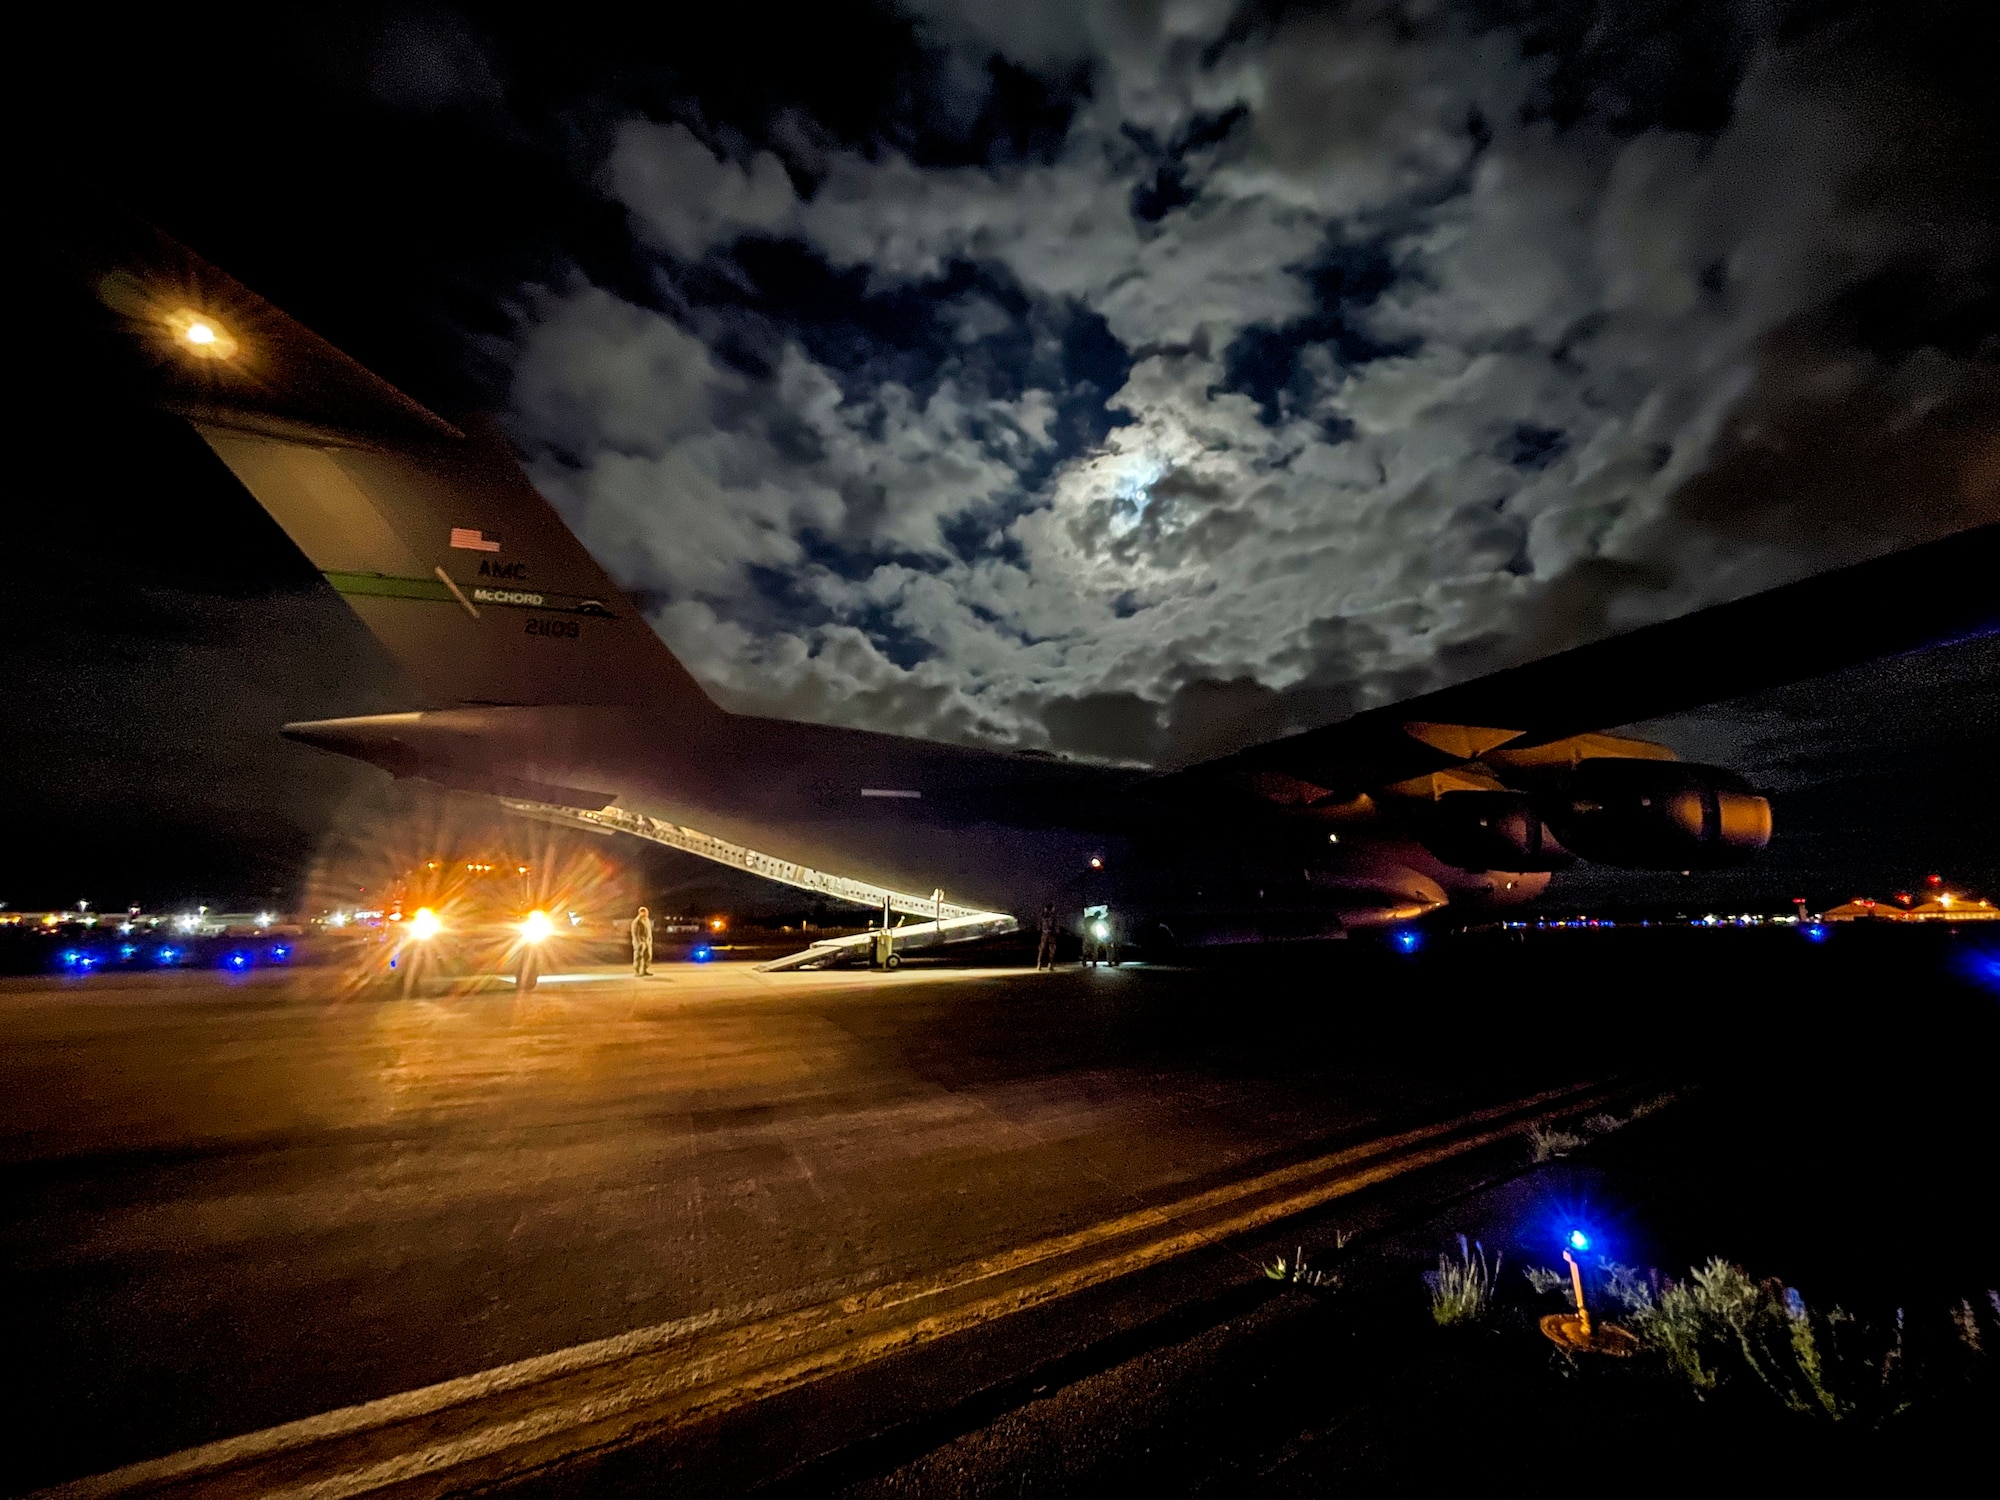 U.S. Air Force Airmen with the 62nd Airlift Wing and 627th Logistics Readiness Squadron perform a wet-wing defuel procedure on a C-17 Globemaster III as part of Exercise Rainier War at Joint Base Lewis-McChord, Washington, April 27, 2021. Rainier War tests the 62nd Airlift Wing's capability to plan, generate and execute a deployment tasking, sustain contingency operations, demonstrate full spectrum readiness while executing agile combat employment in a contested, degraded and operationally limited environment. (U.S. Air Force photo by Master Sgt. Julius Delos Reyes)